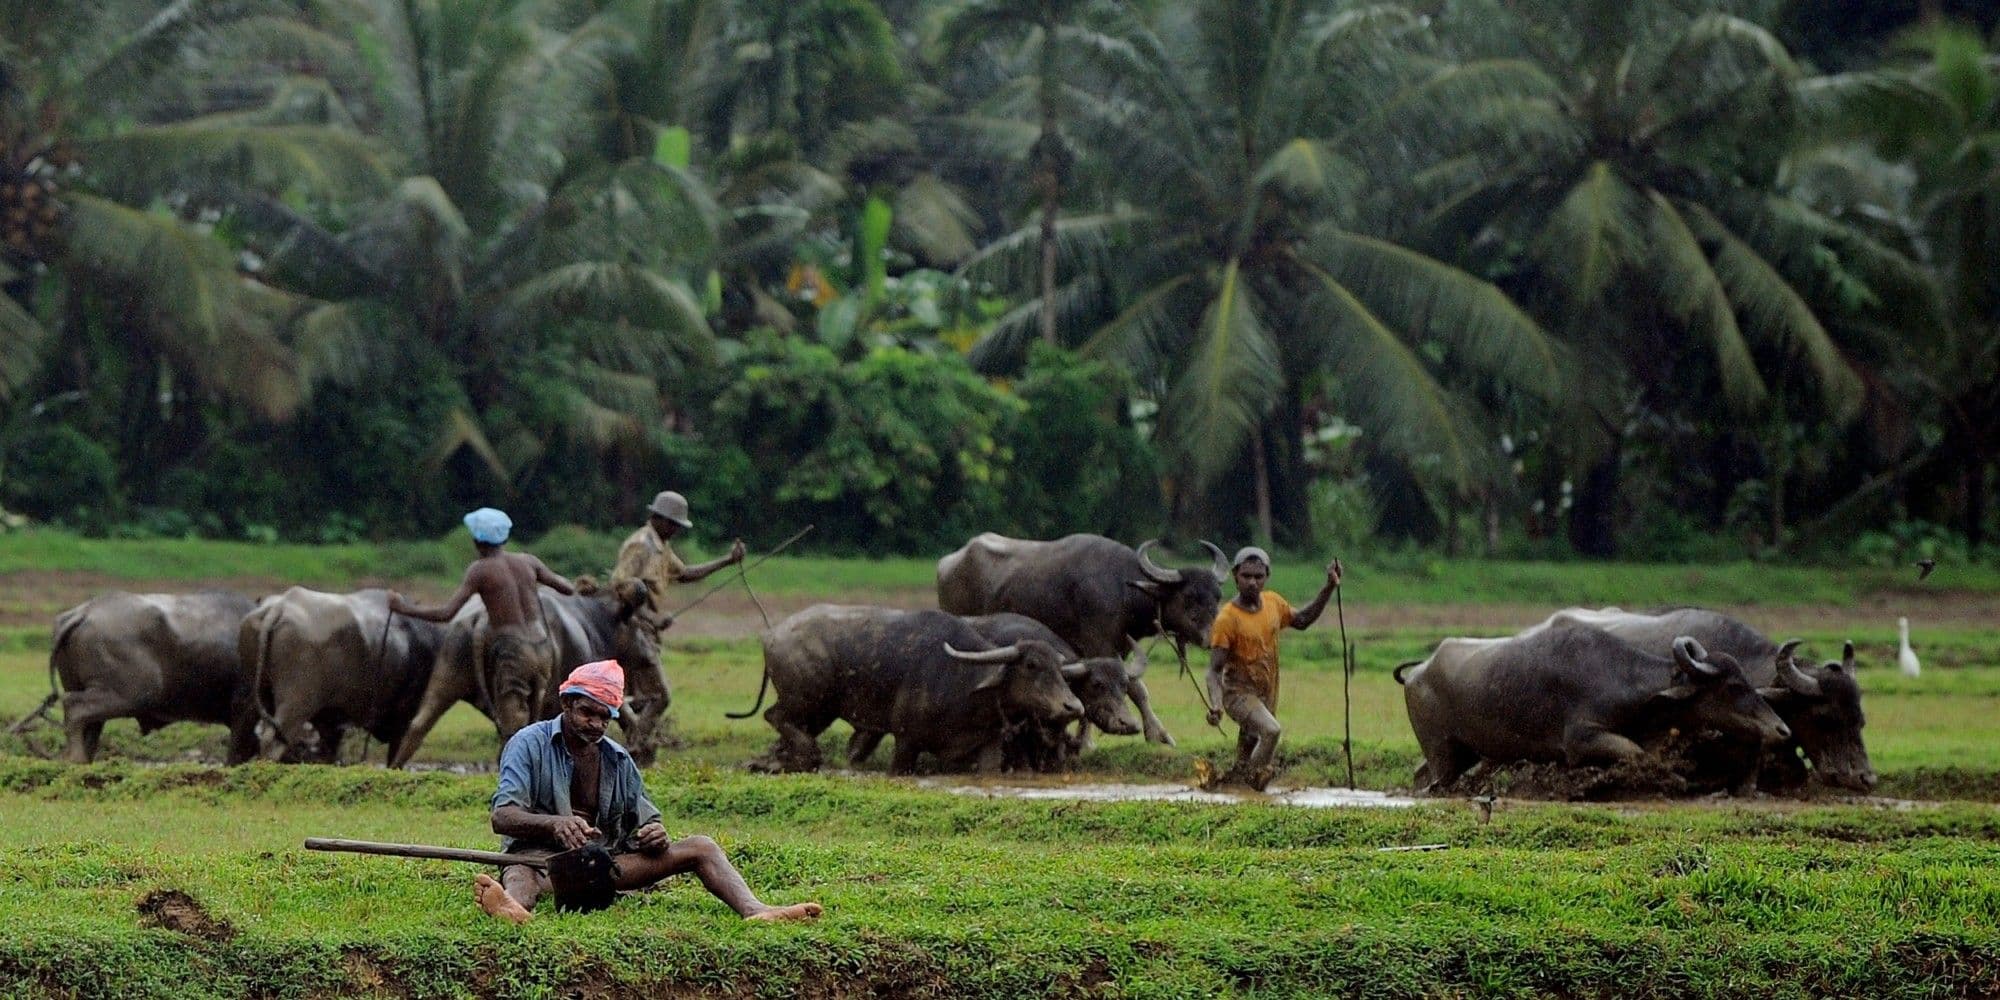 A group of farmers farming their paddy fields with their bulls